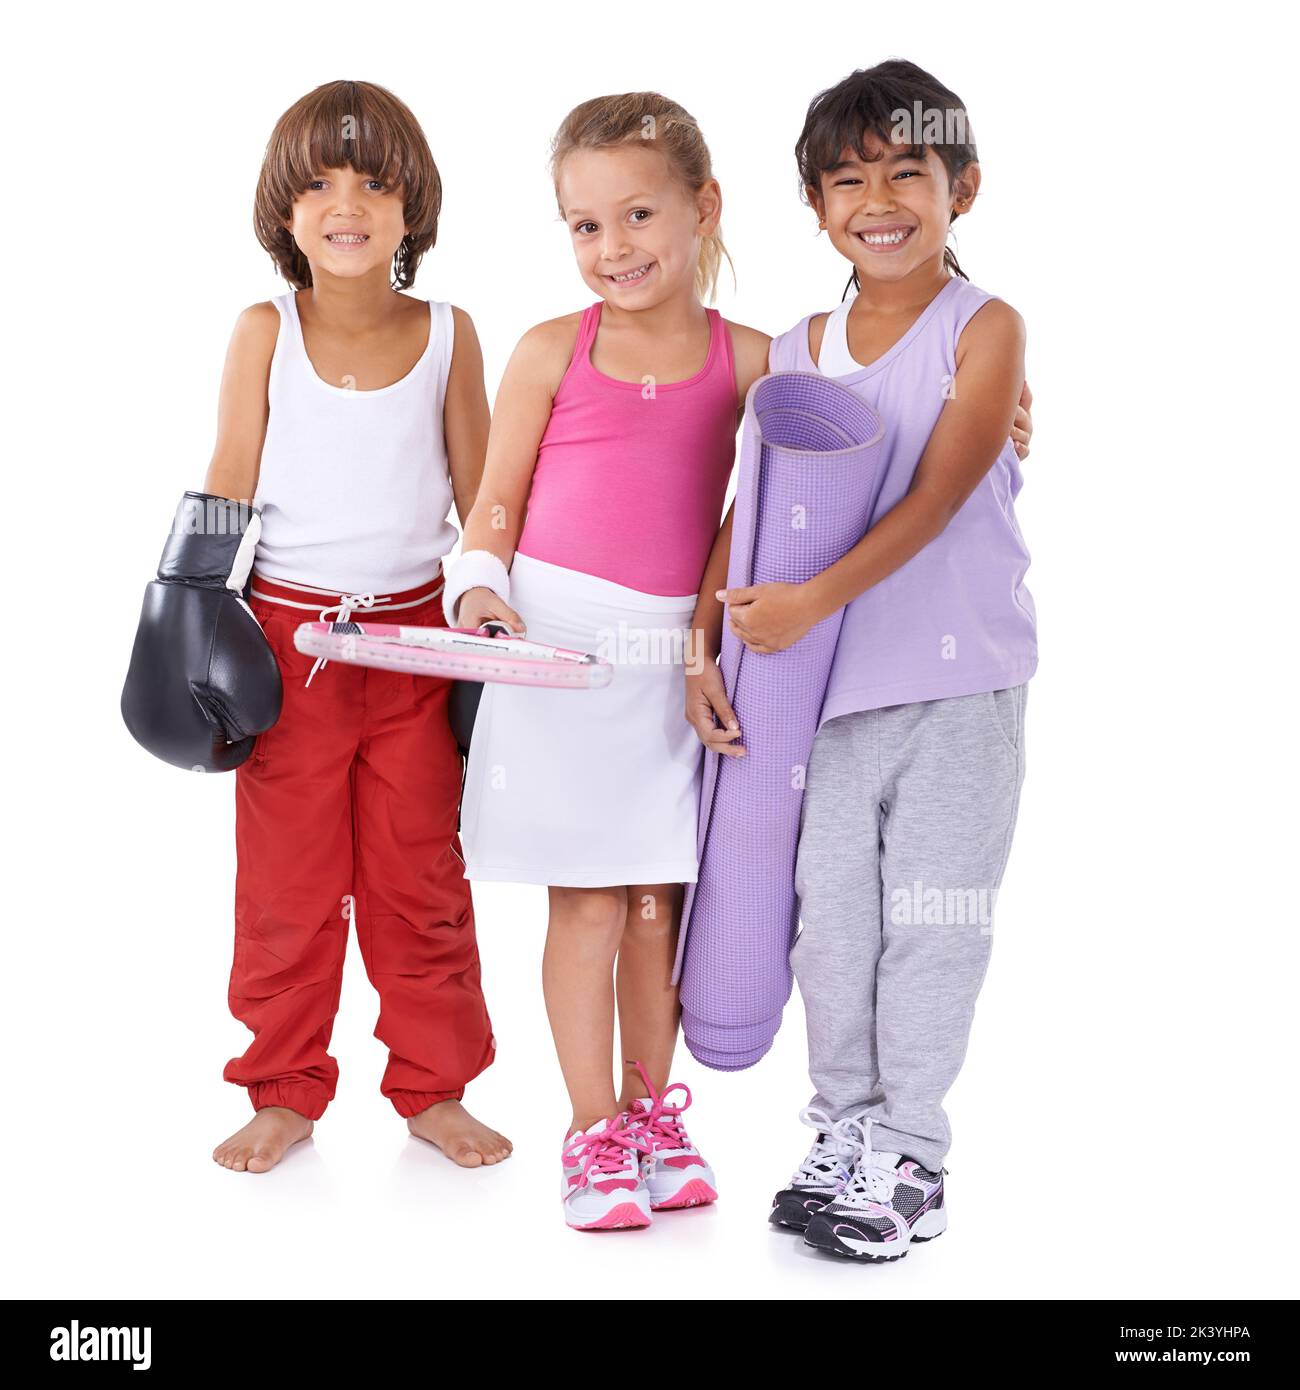 A look in to their future...A group of three children in sportswear isolated on white. Stock Photo